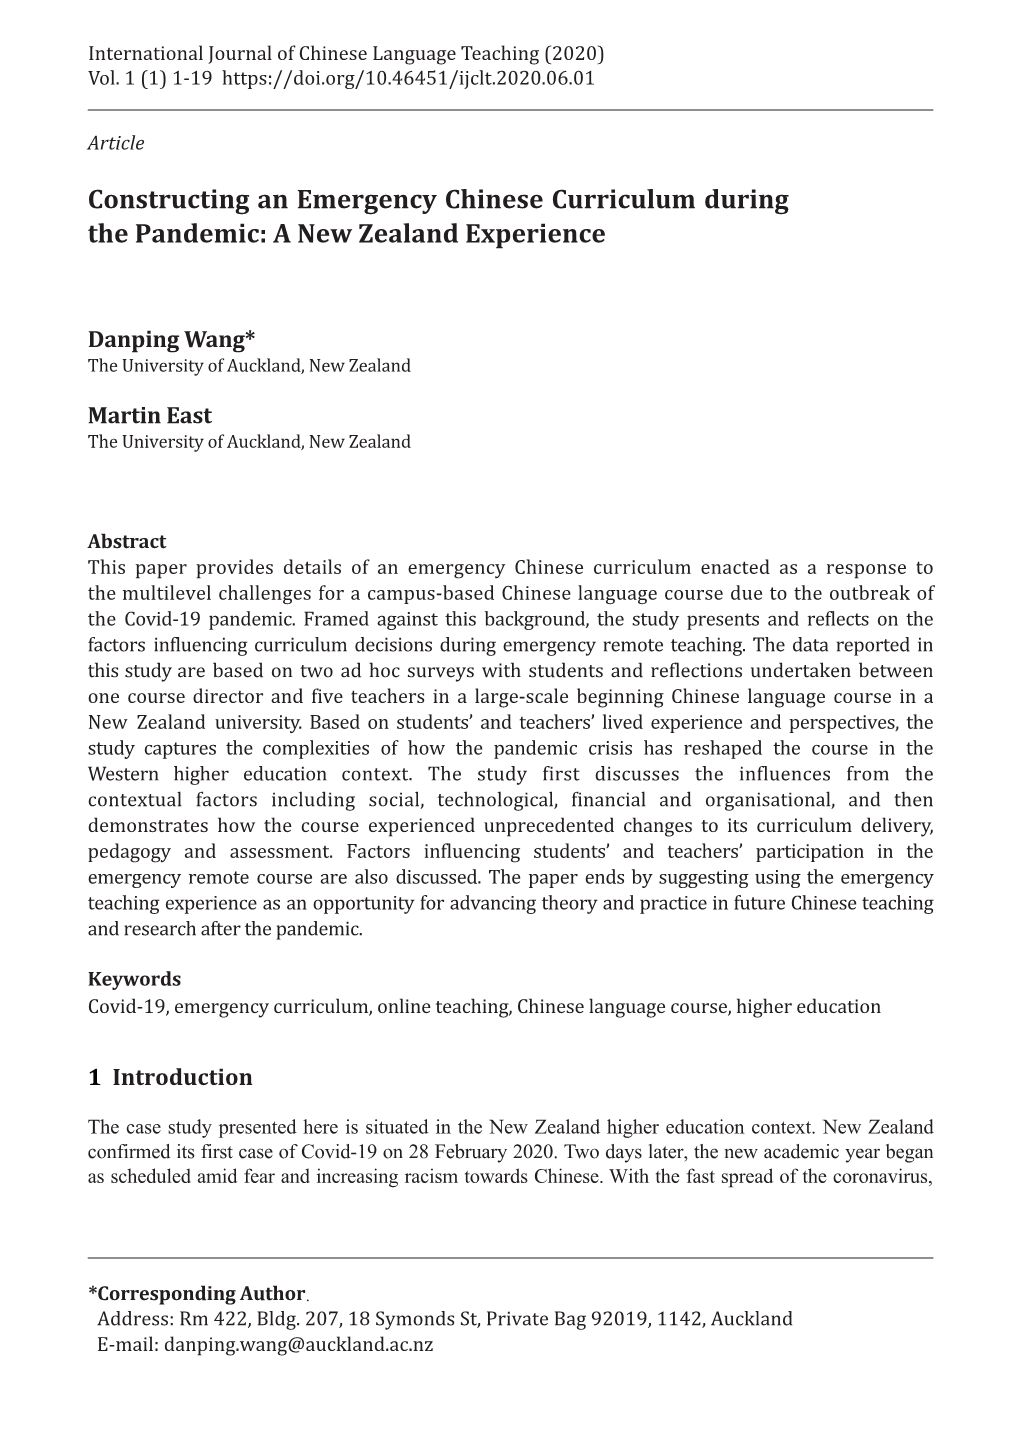 Constructing an Emergency Chinese Curriculum During the Pandemic: a New Zealand Experience